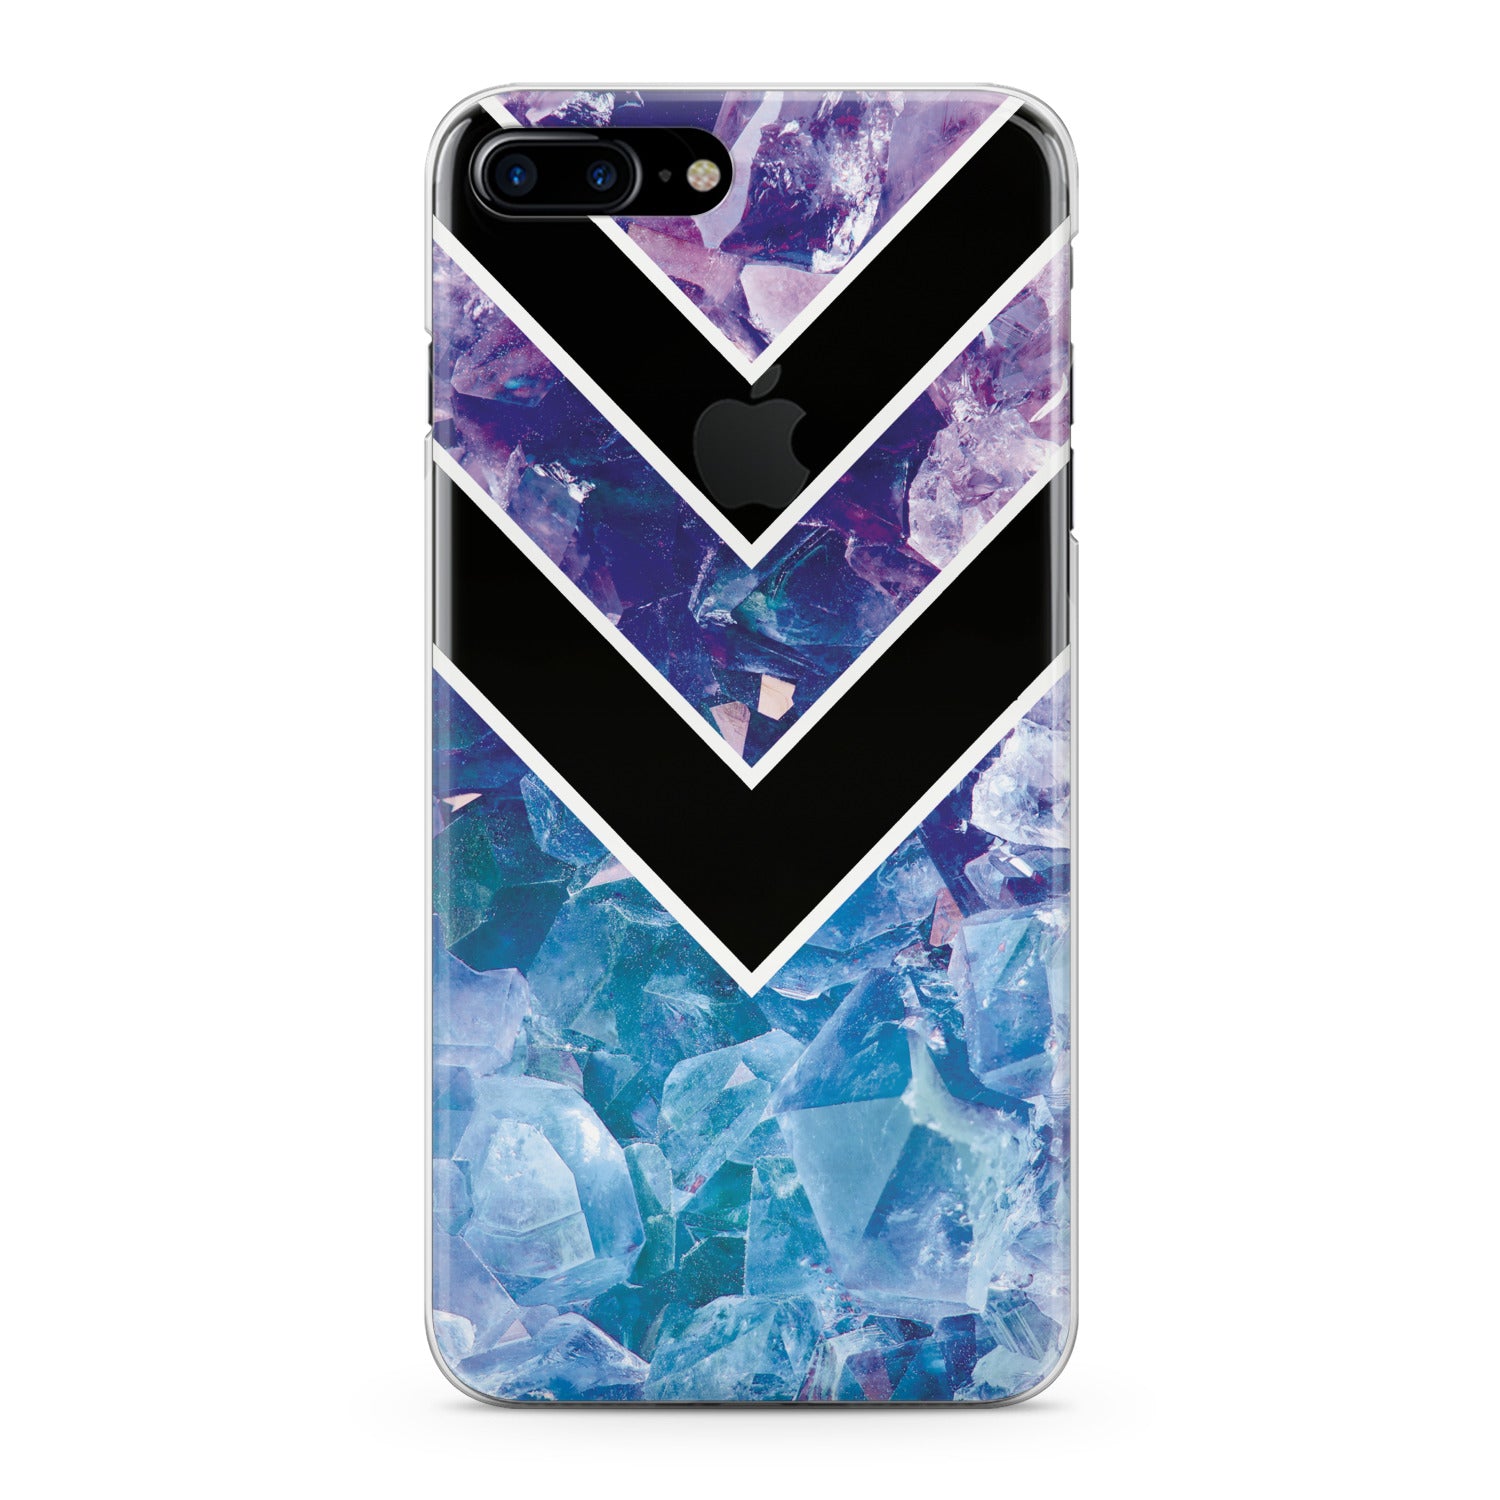 Lex Altern Crystal Print Phone Case for your iPhone & Android phone.